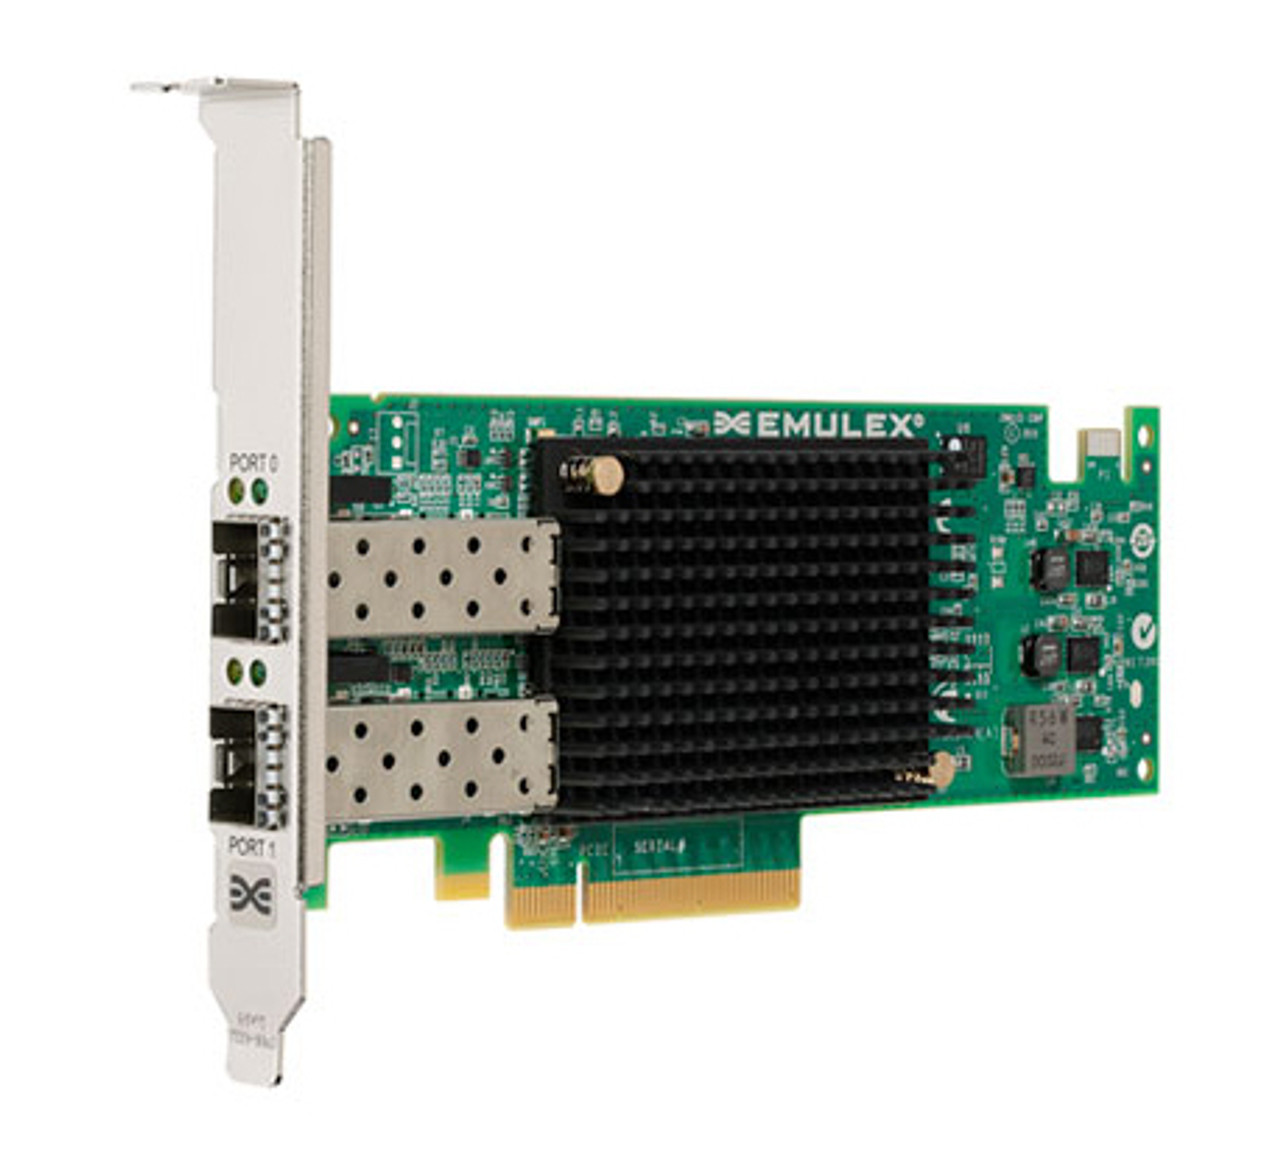 90Y3551 IBM Dual-Ports 10Gbps Gigabit Ethernet PCI Express 2.0 x8 Virtual Fabric Network Adapter II (CFFh) by Emulex for System x